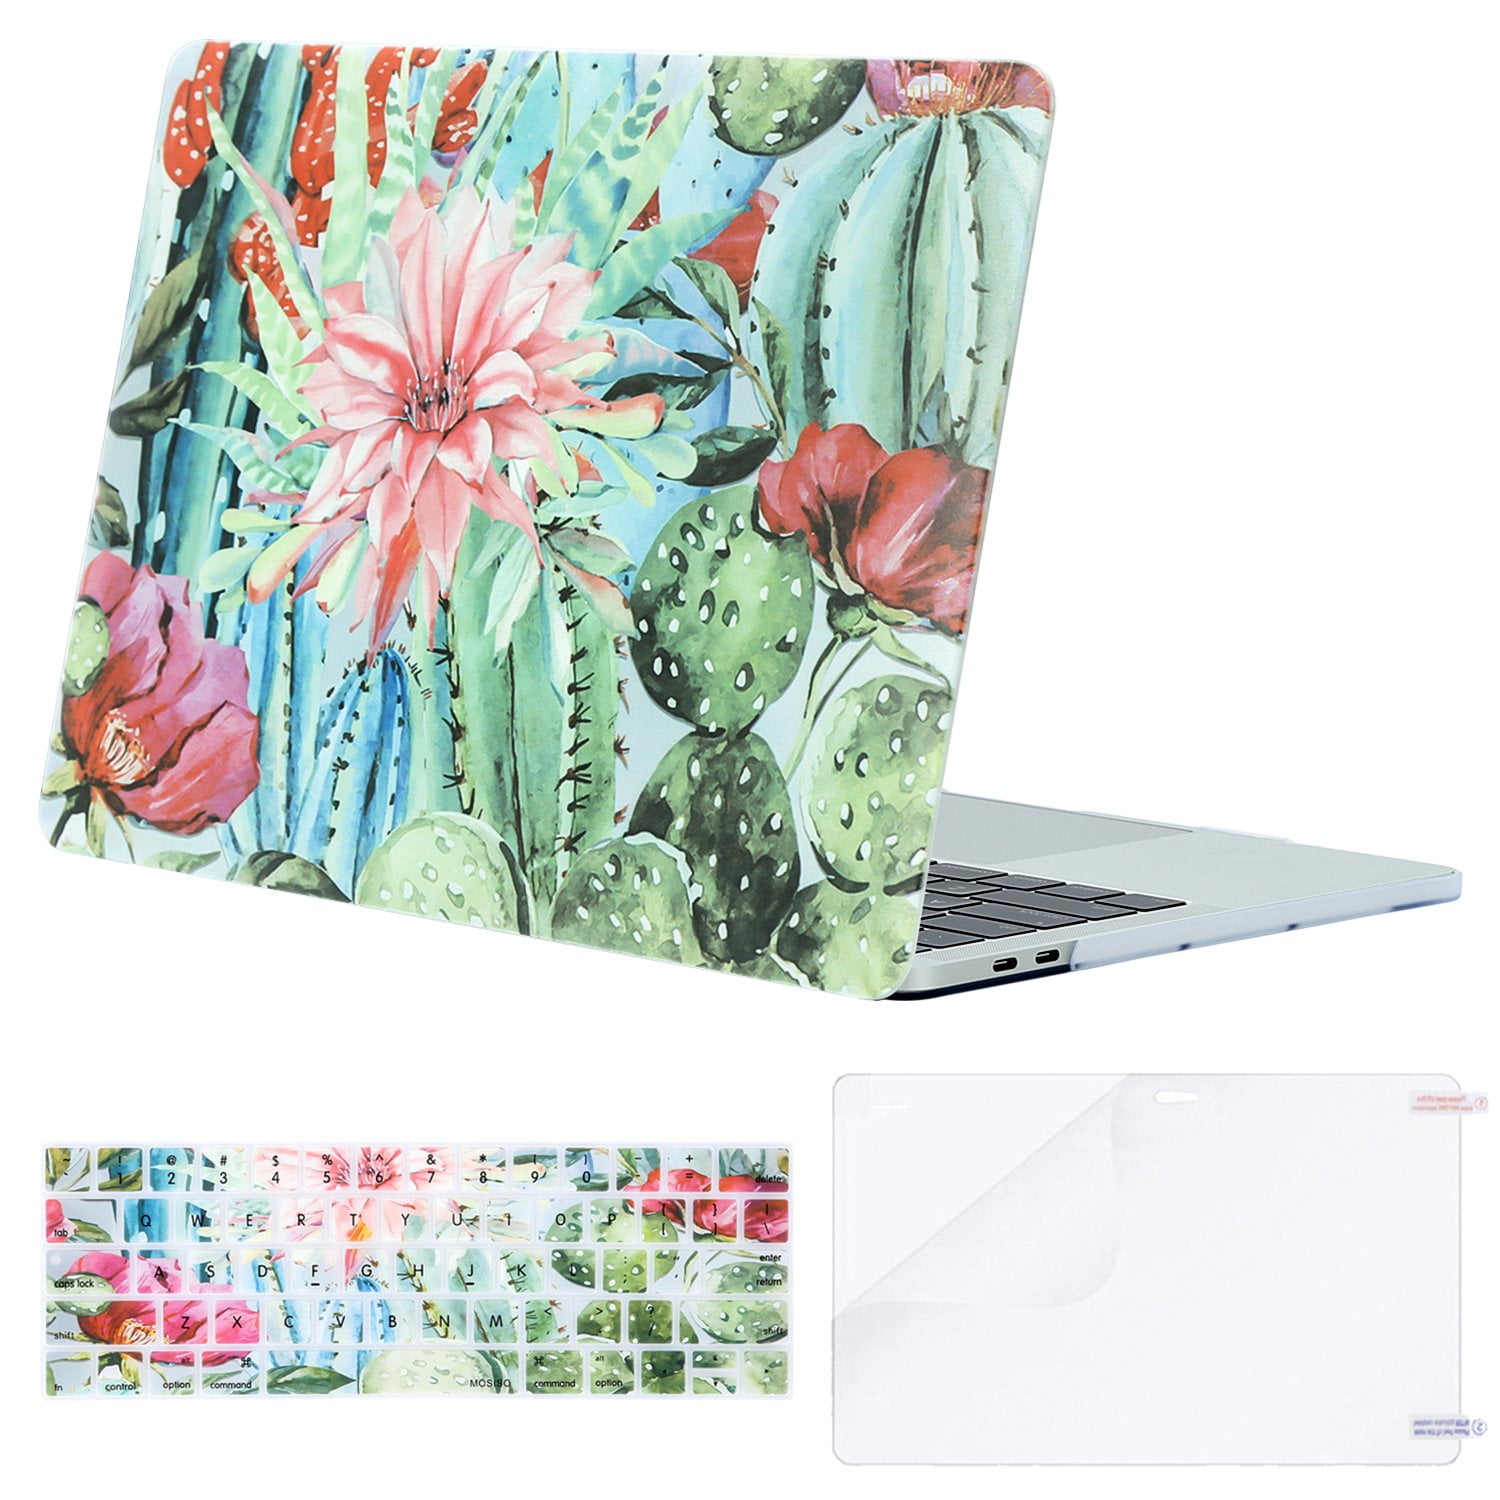 Laptop Hard Shell Case Casual Flowers Free Little Pretty Plastic Hard Shell Compatible Mac Air 11 Pro 13 15 MacBook Air 2018 Case Protection for MacBook 2016-2019 Version 